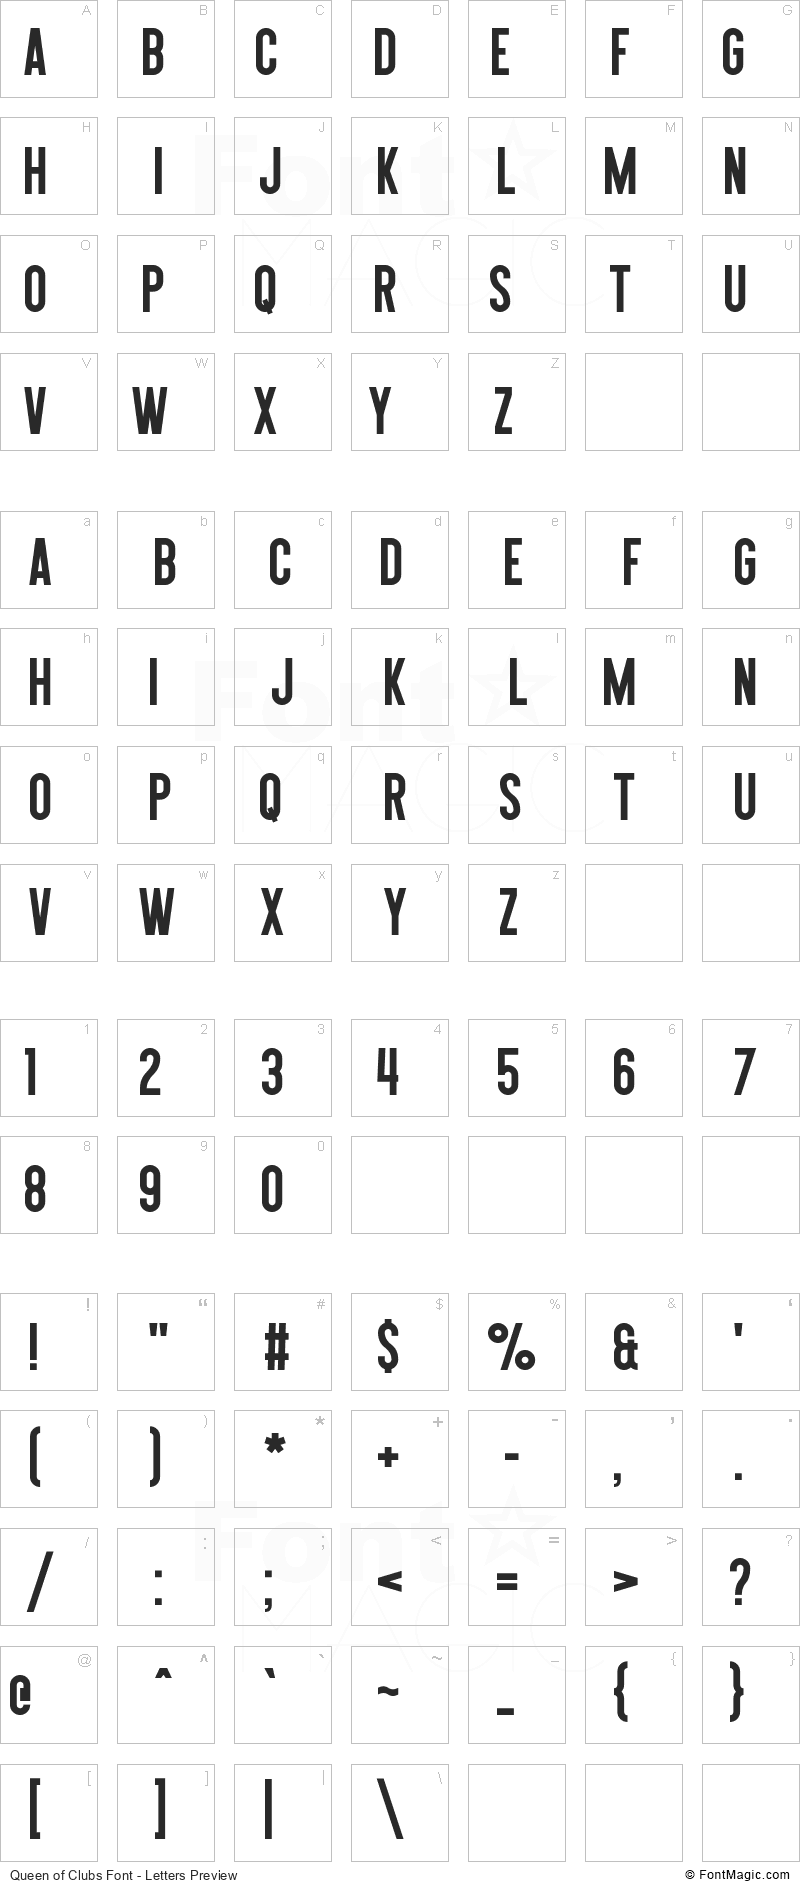 Queen of Clubs Font - All Latters Preview Chart